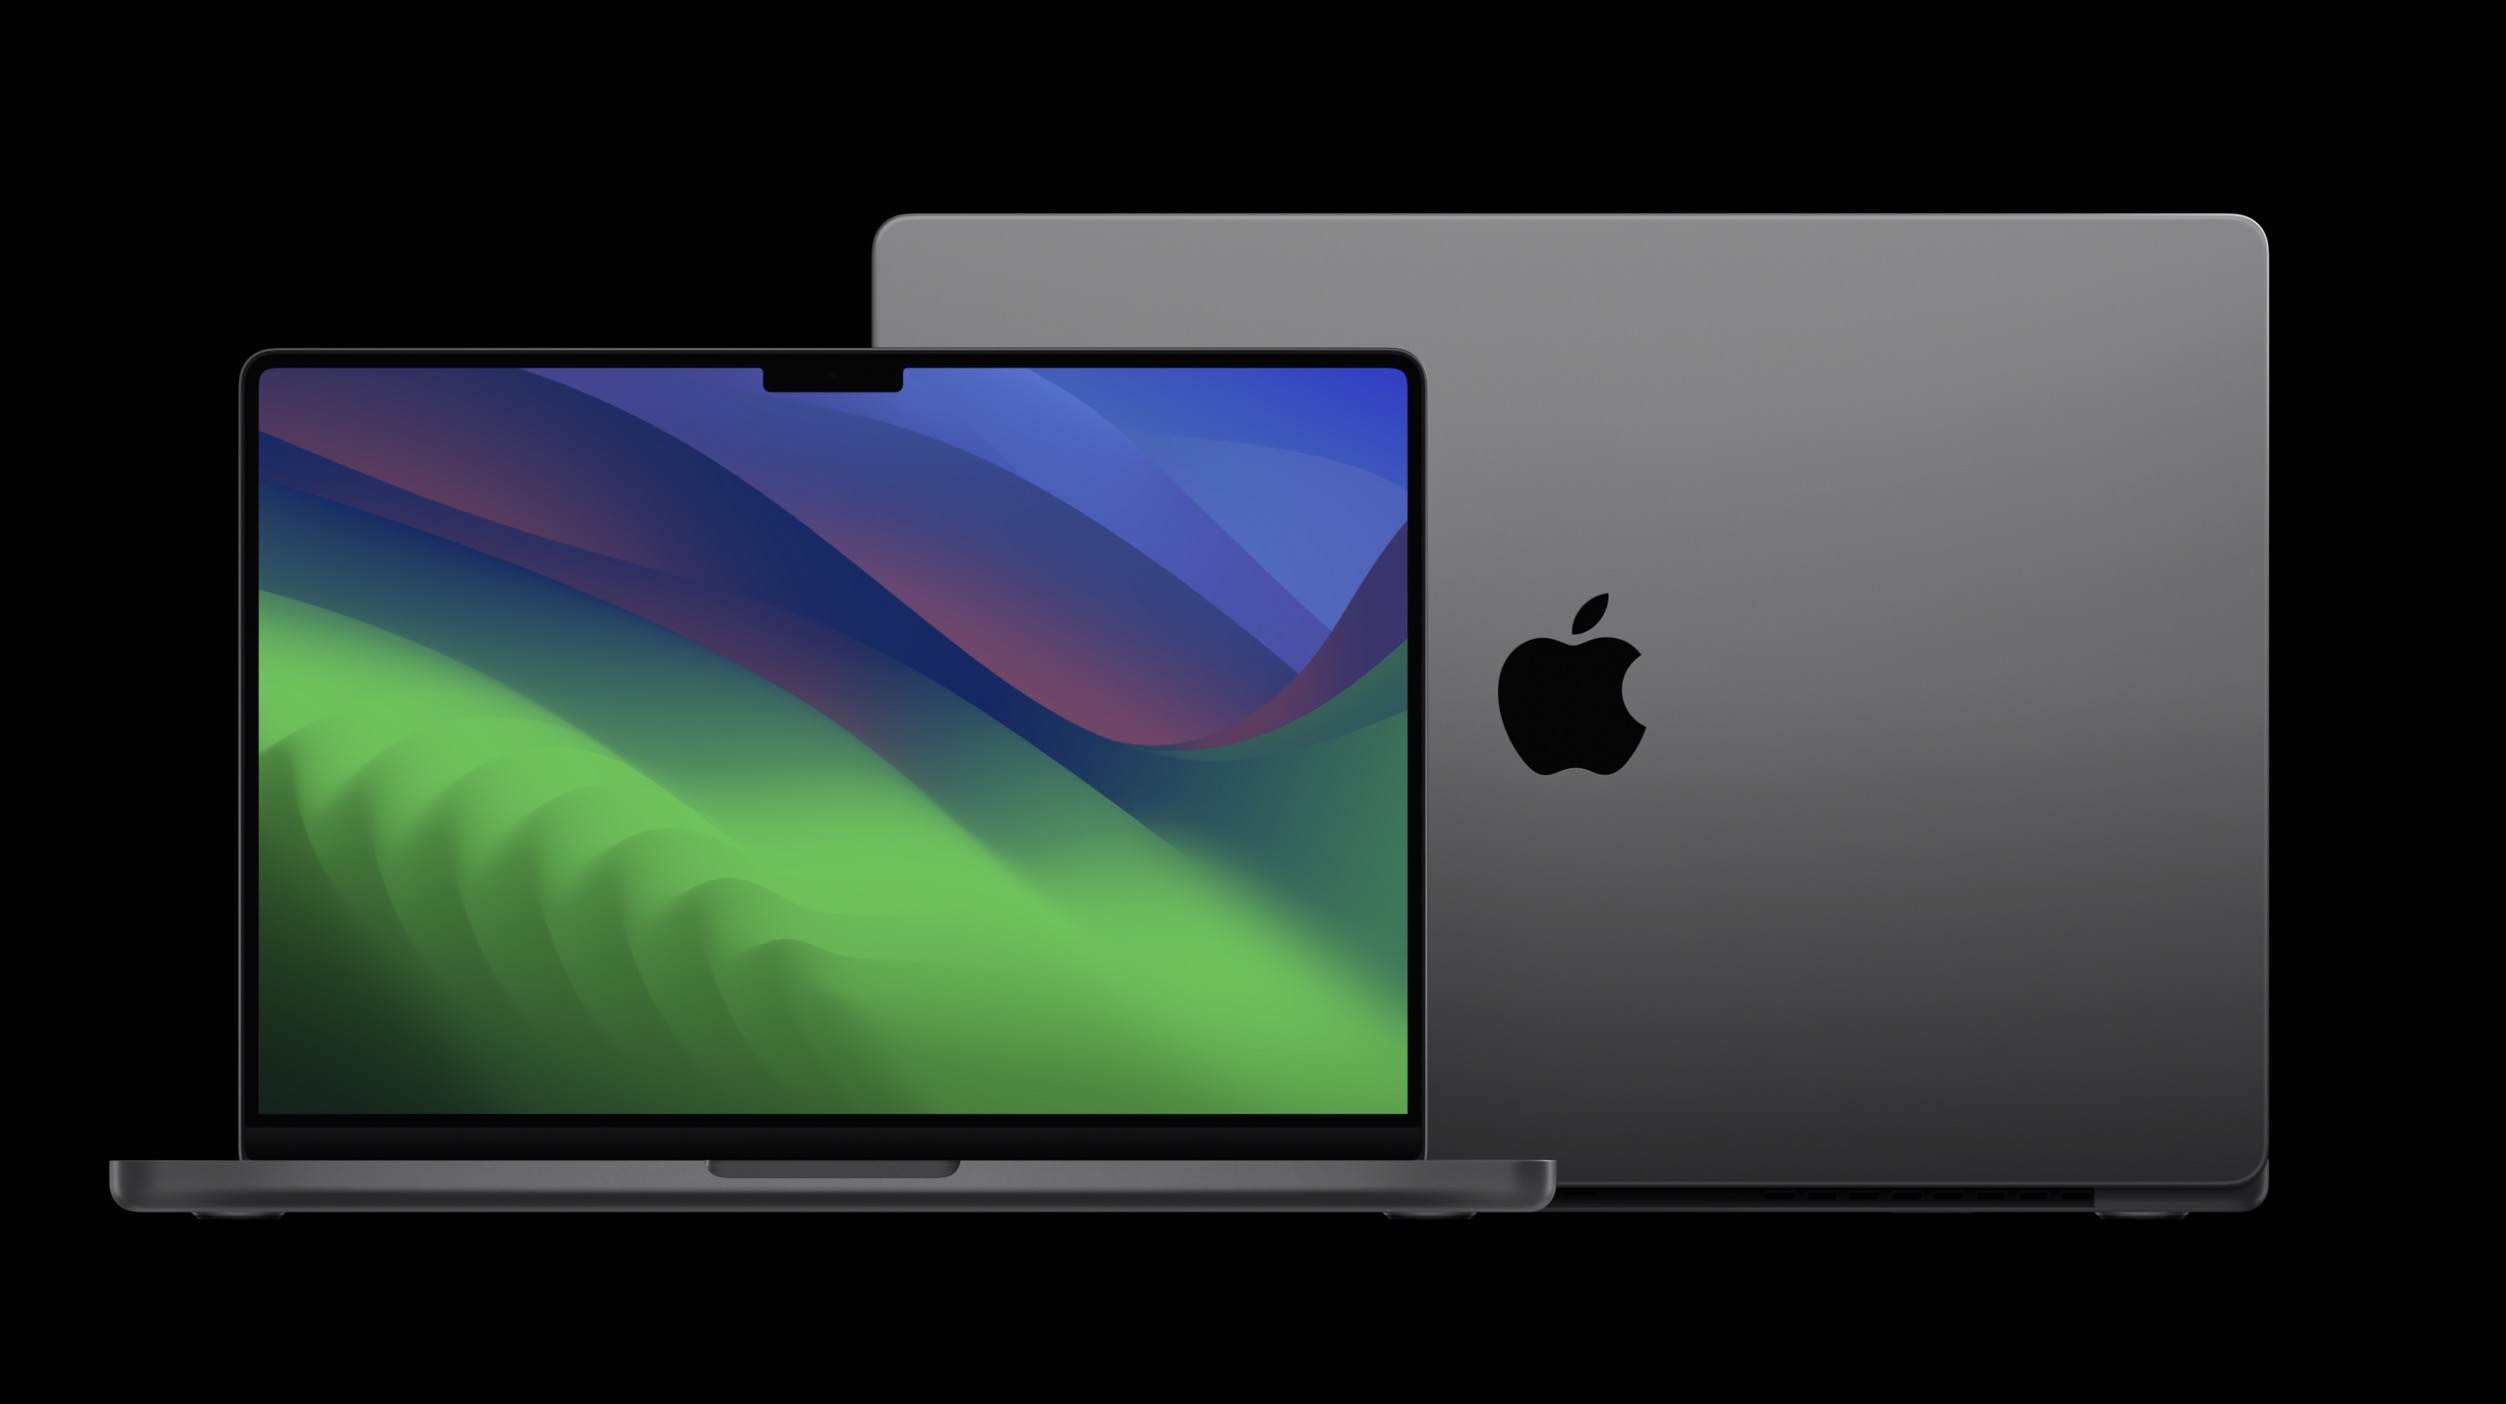 Apple announces new 14-inch and 16-inch MacBook Pro: M3 chip, Space Black,  cheaper $1599 starting price - 9to5Mac